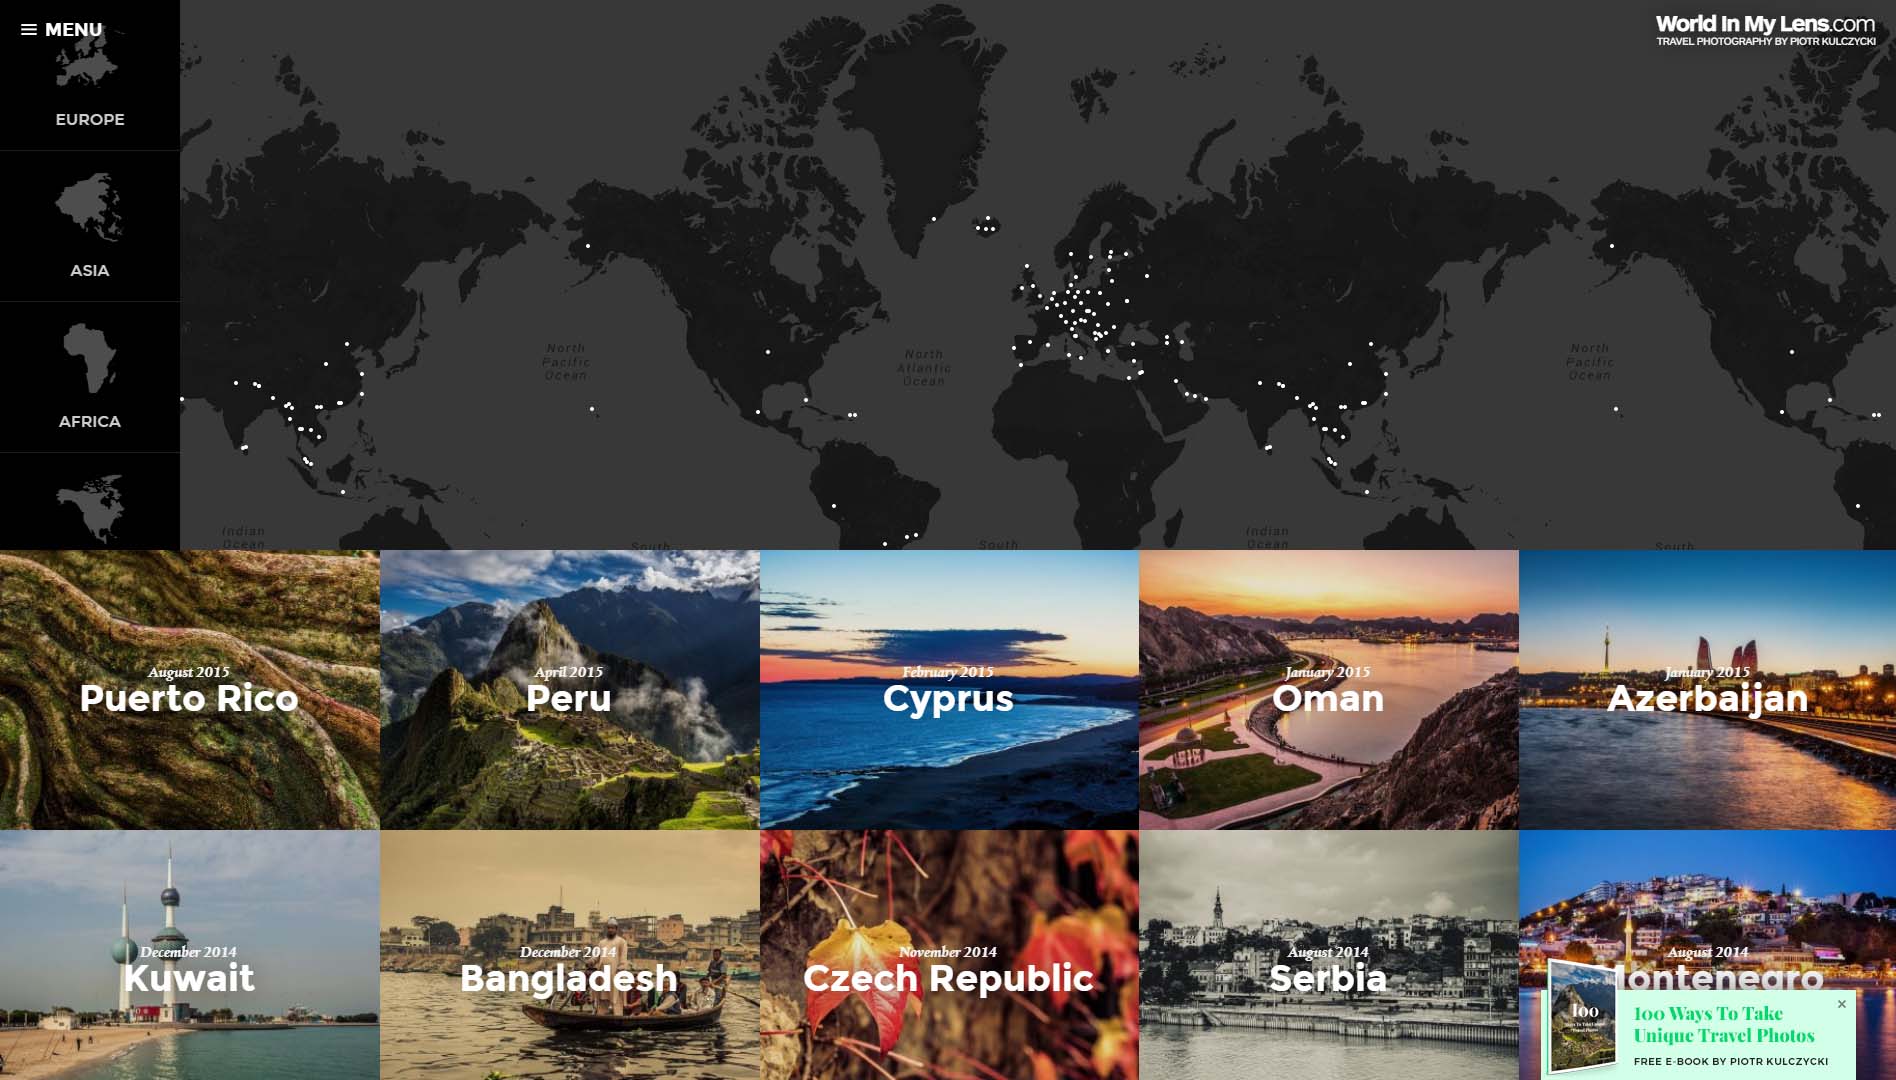 World in my lens homepage